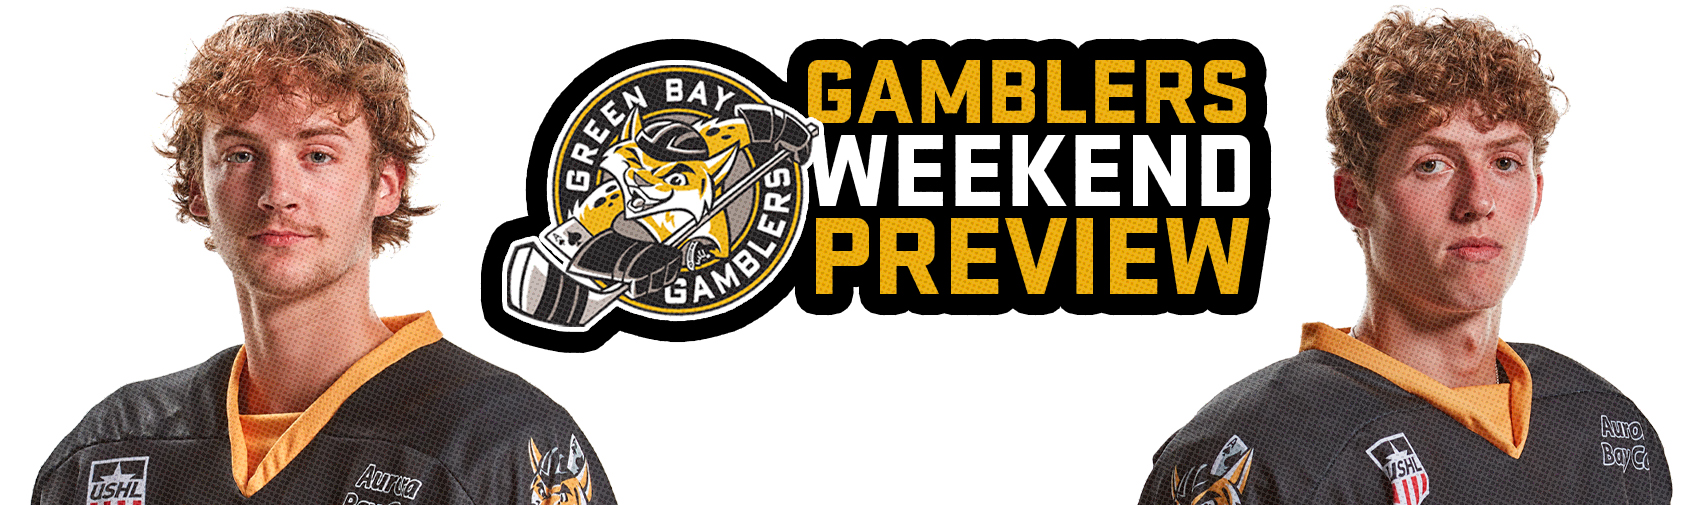 gamblers-weekend-preview-september-30th-october-1st